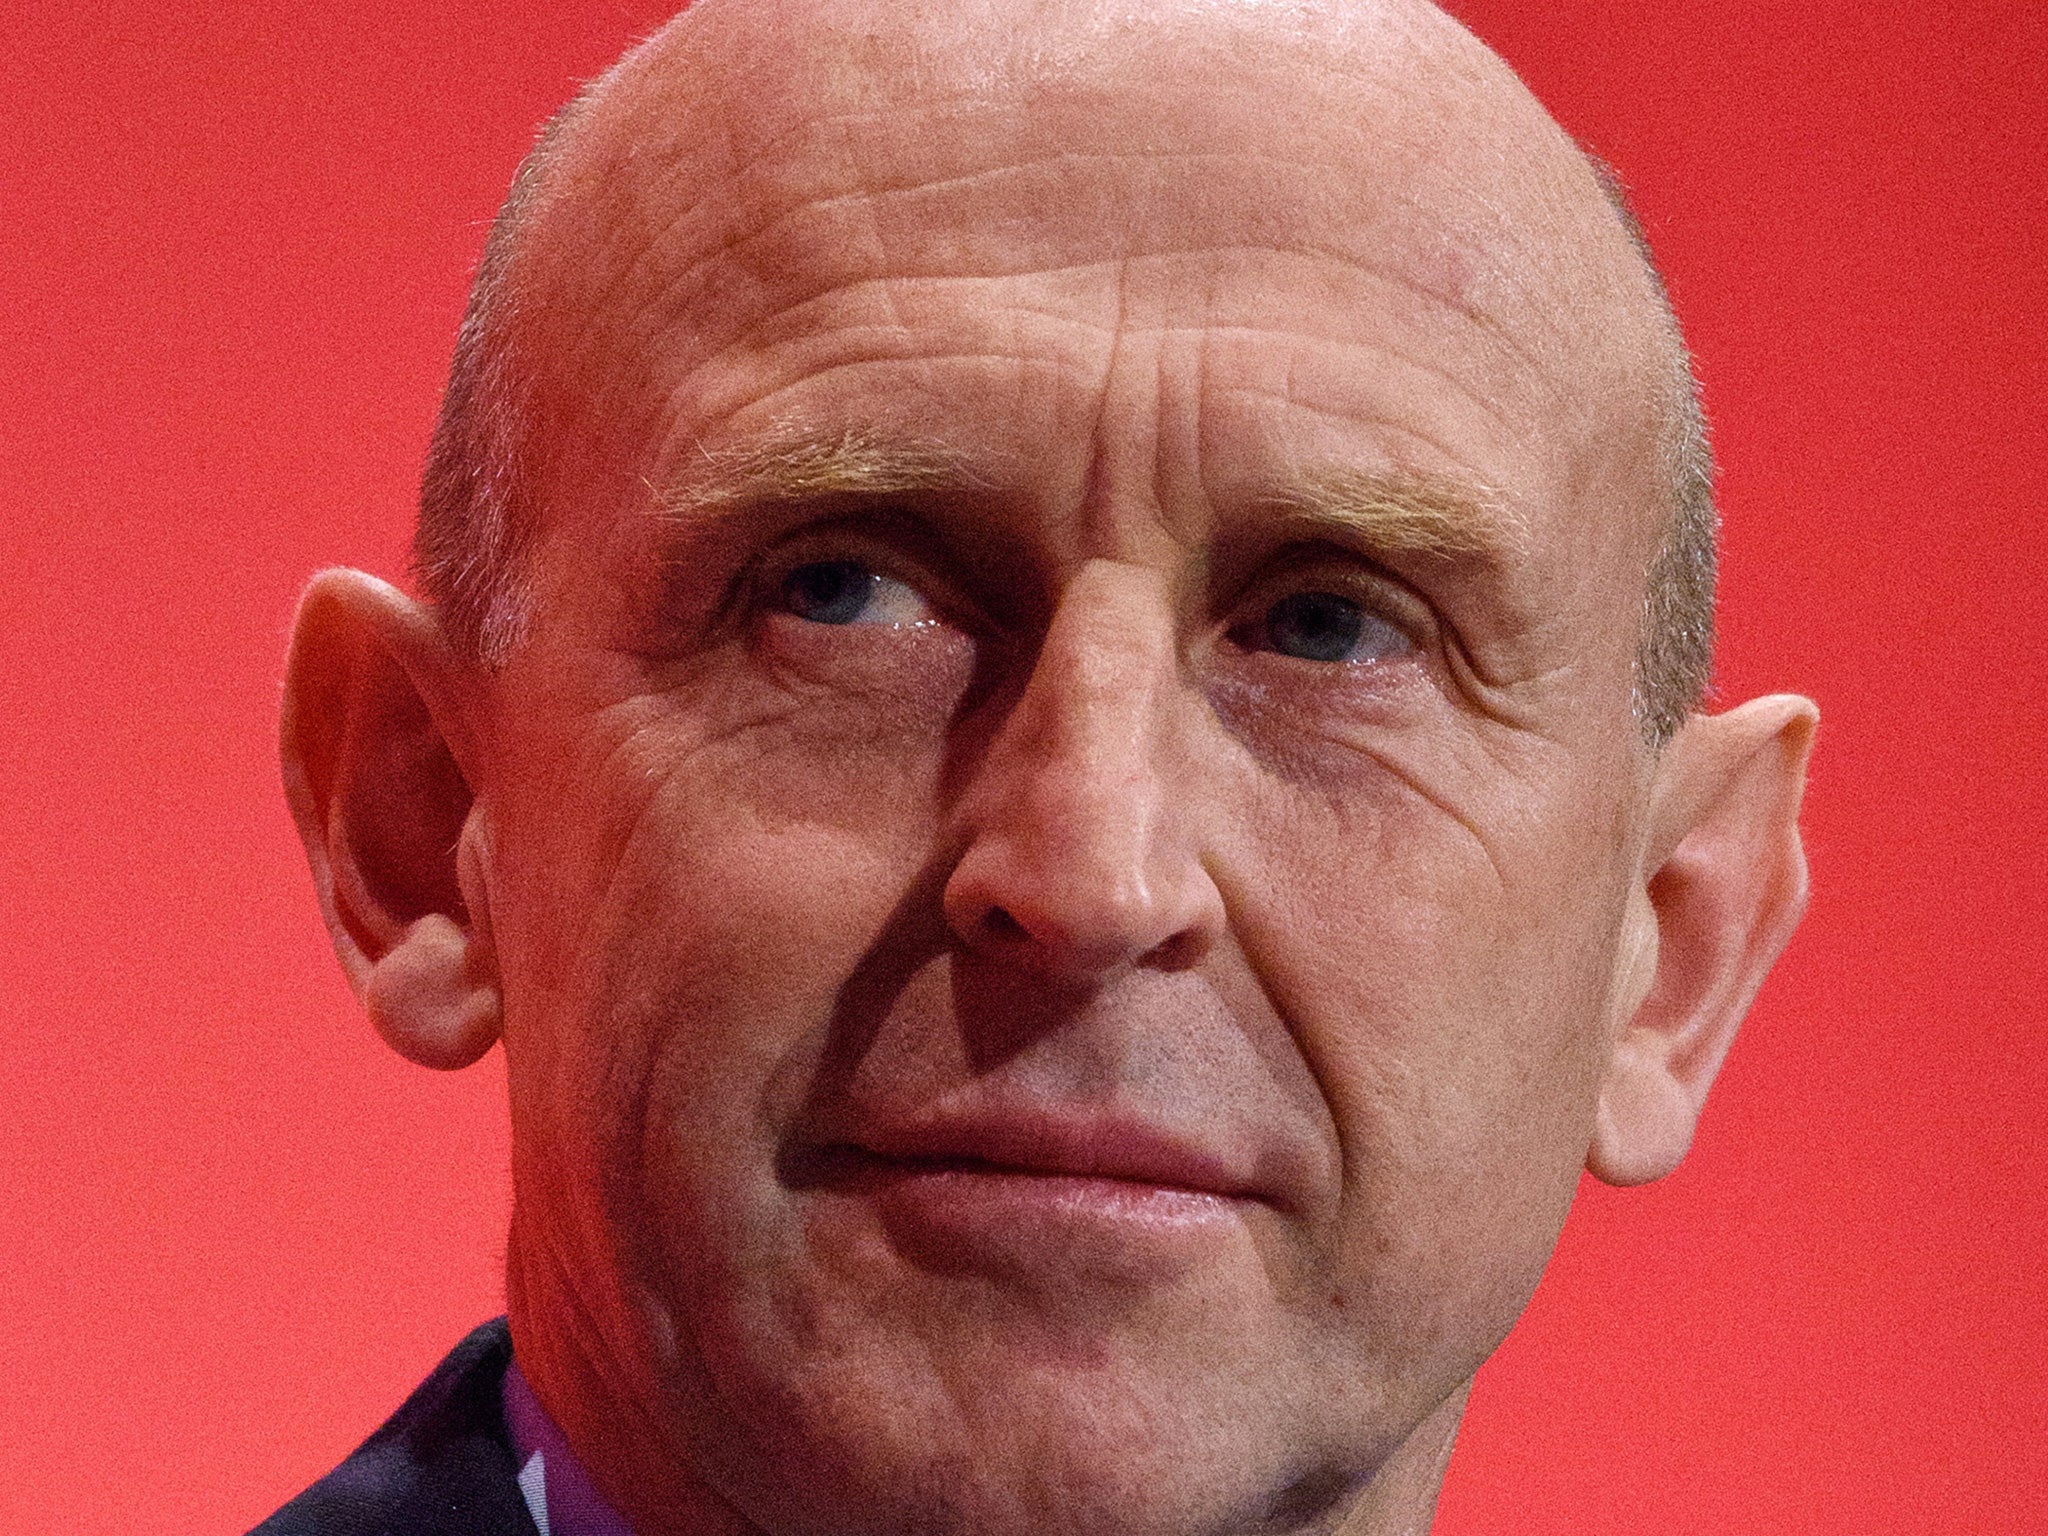 Shadow housing minister John Healey has criticised the decision